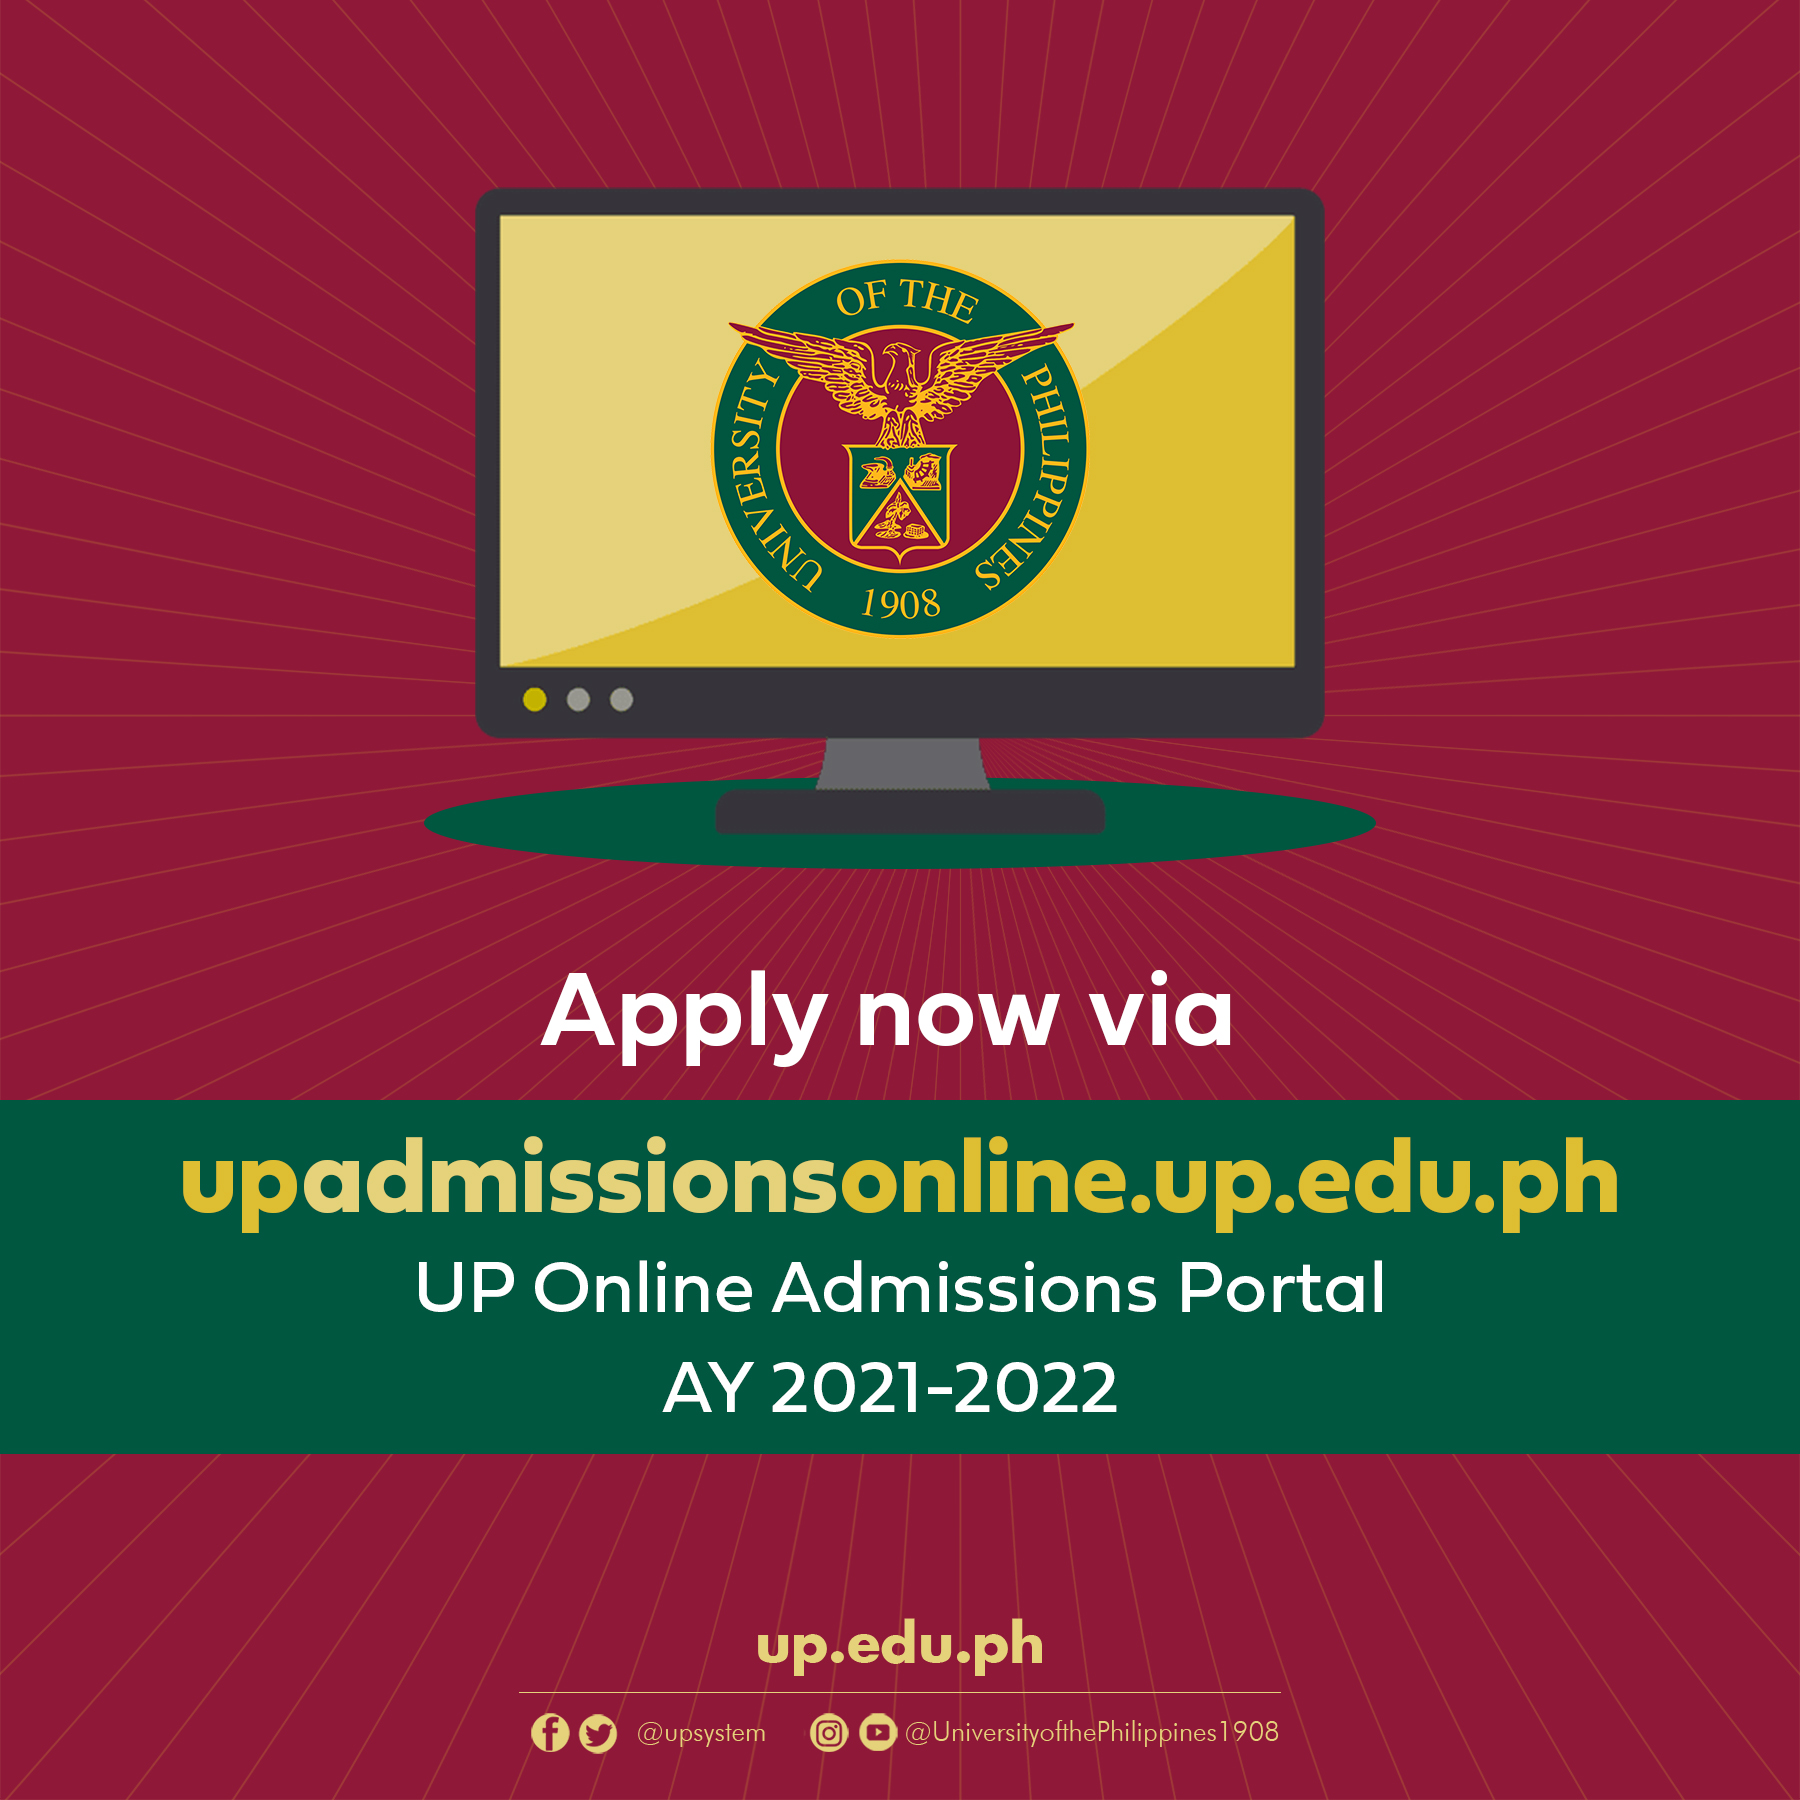 UP launches online portal for first-year applicants for AY 2021-2022